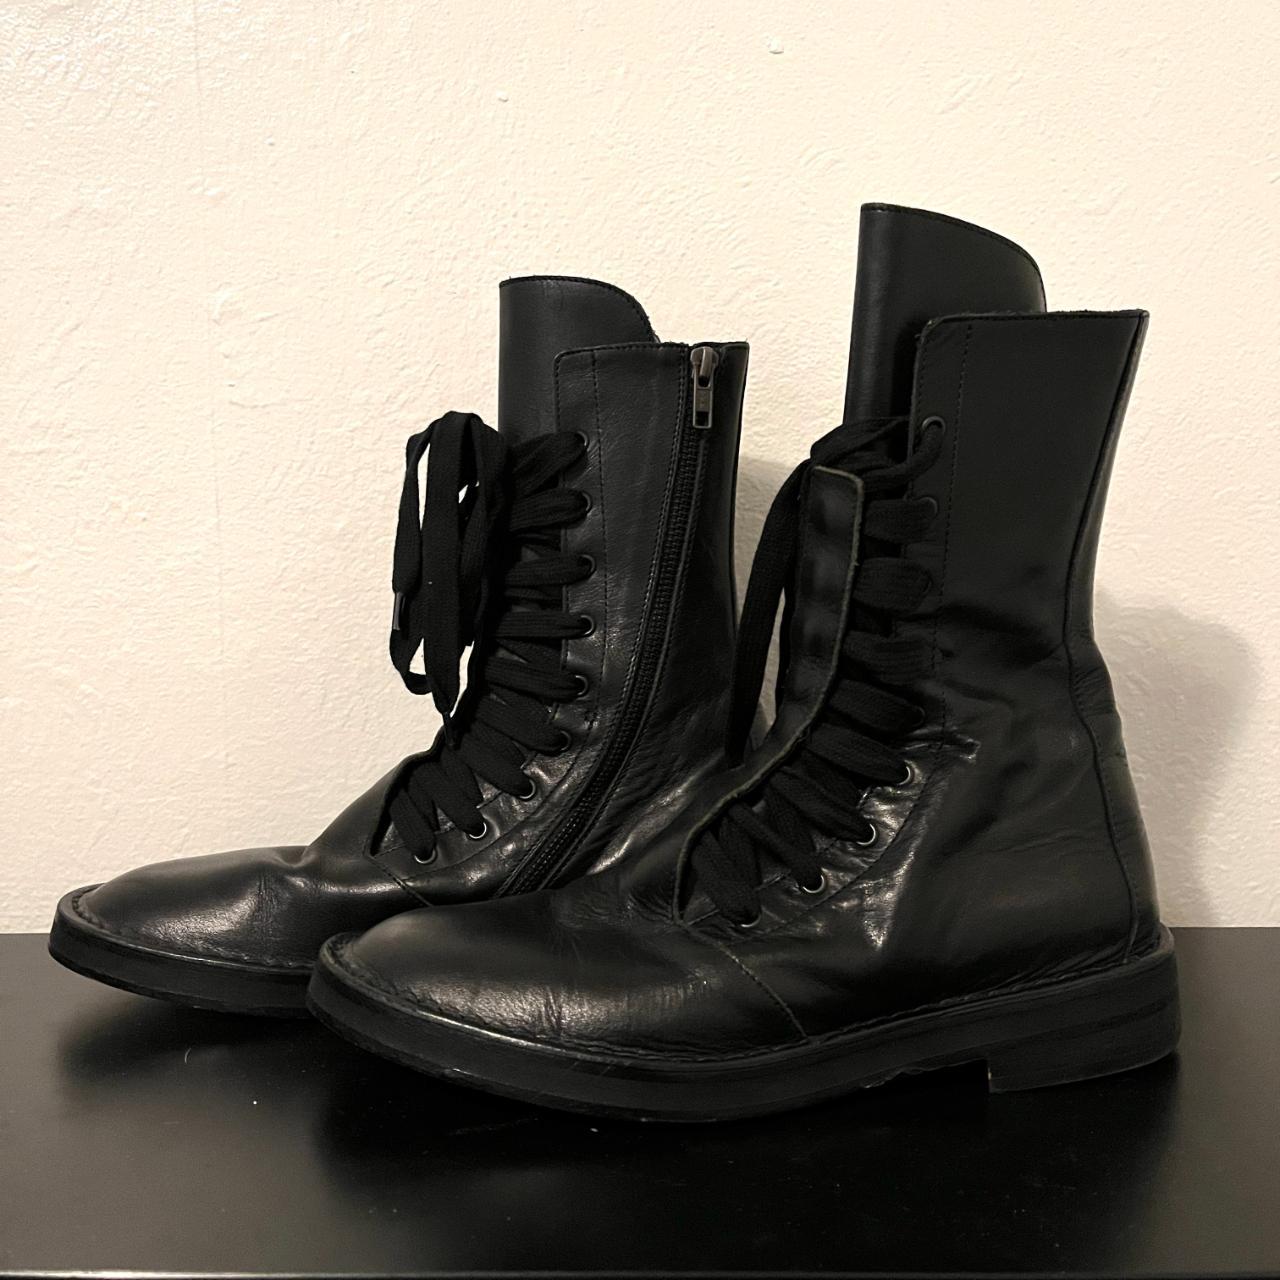 Rare vintage Ann Demeulemeester boots! Made in... - Depop